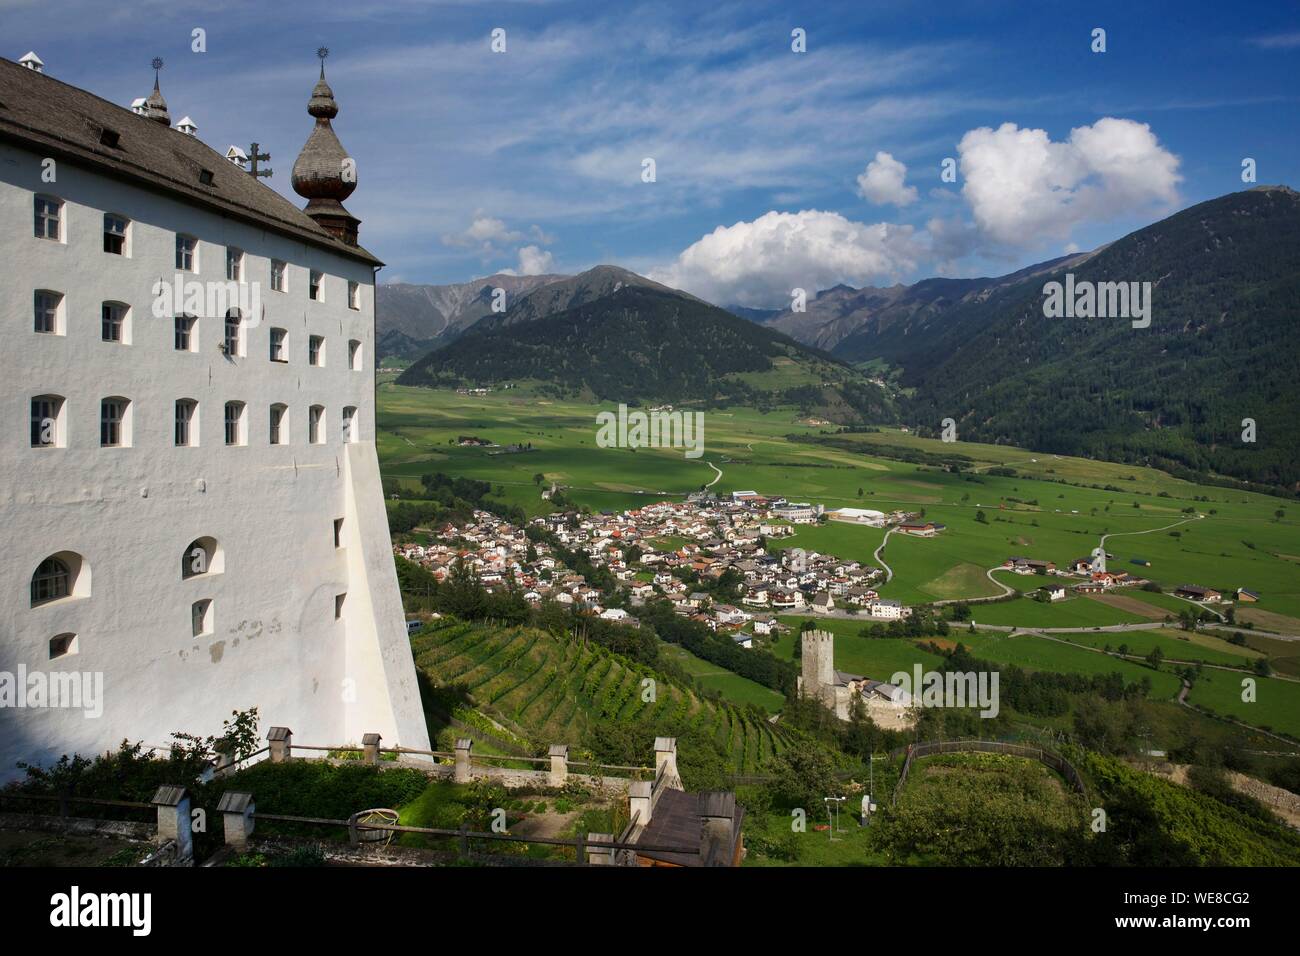 Italy, autonomous province of Bolzano, Val Venosta, Marienberg abbey perched on the side of a mountain and overlooking a green valley and the village of Burgusio Stock Photo